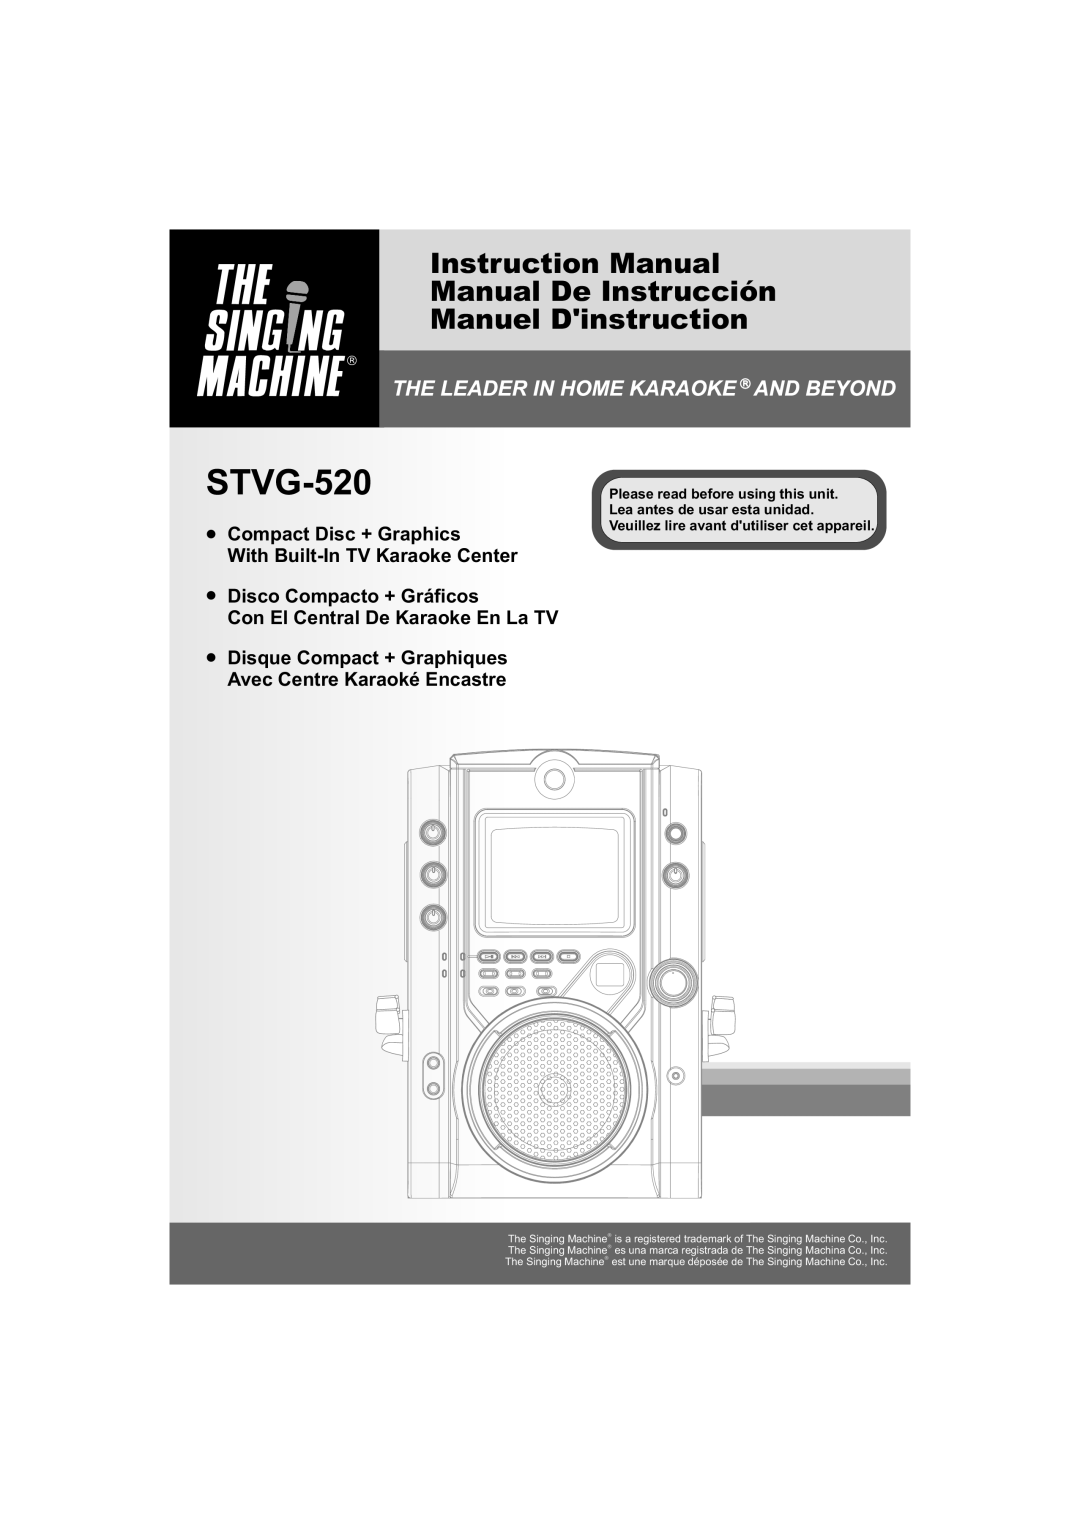 The Singing Machine STVG-520 instruction manual Manuel Dinstruction, Compact Disc + Graphics, Disco Compacto + Gráficos 